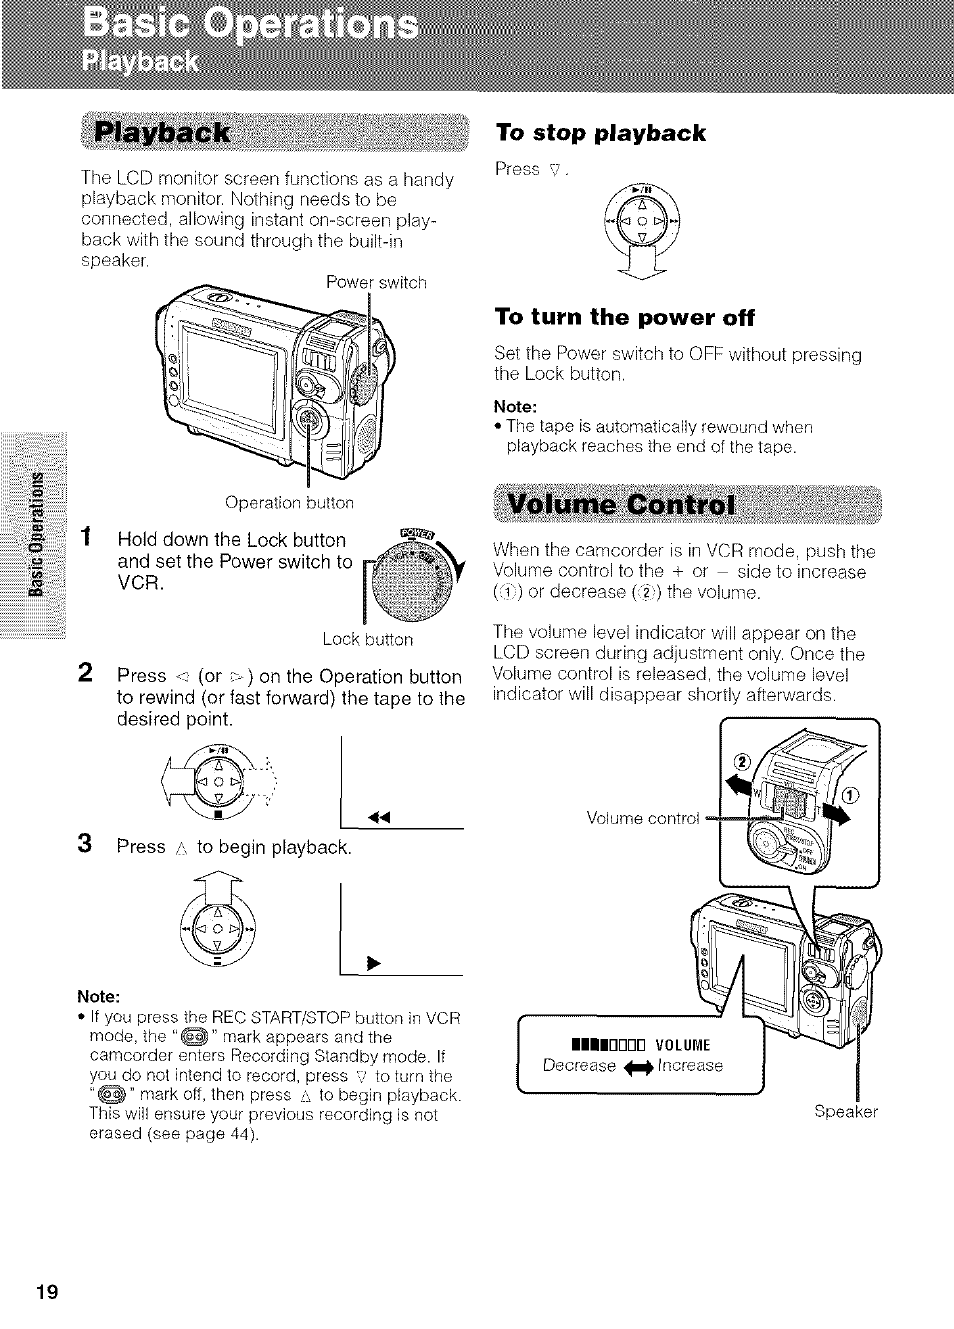 Playback, 3 press a to begin playback, To stop playback | To turn the power off, Volume control | Sharp VIEWCAM VL-NZ50U User Manual | Page 32 / 83